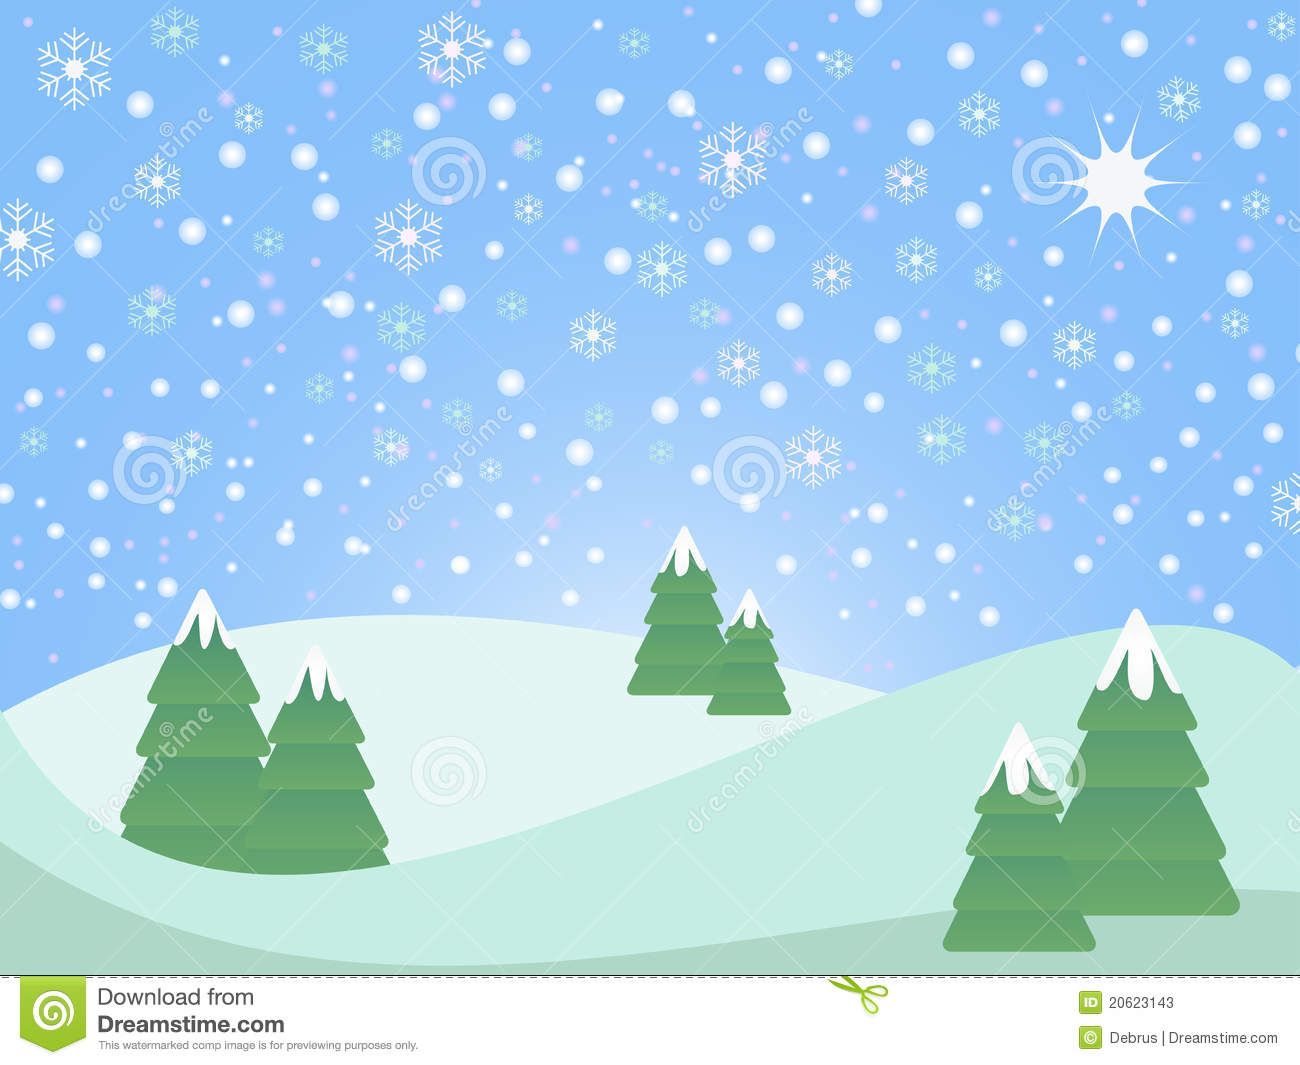 Snowy day clipart.